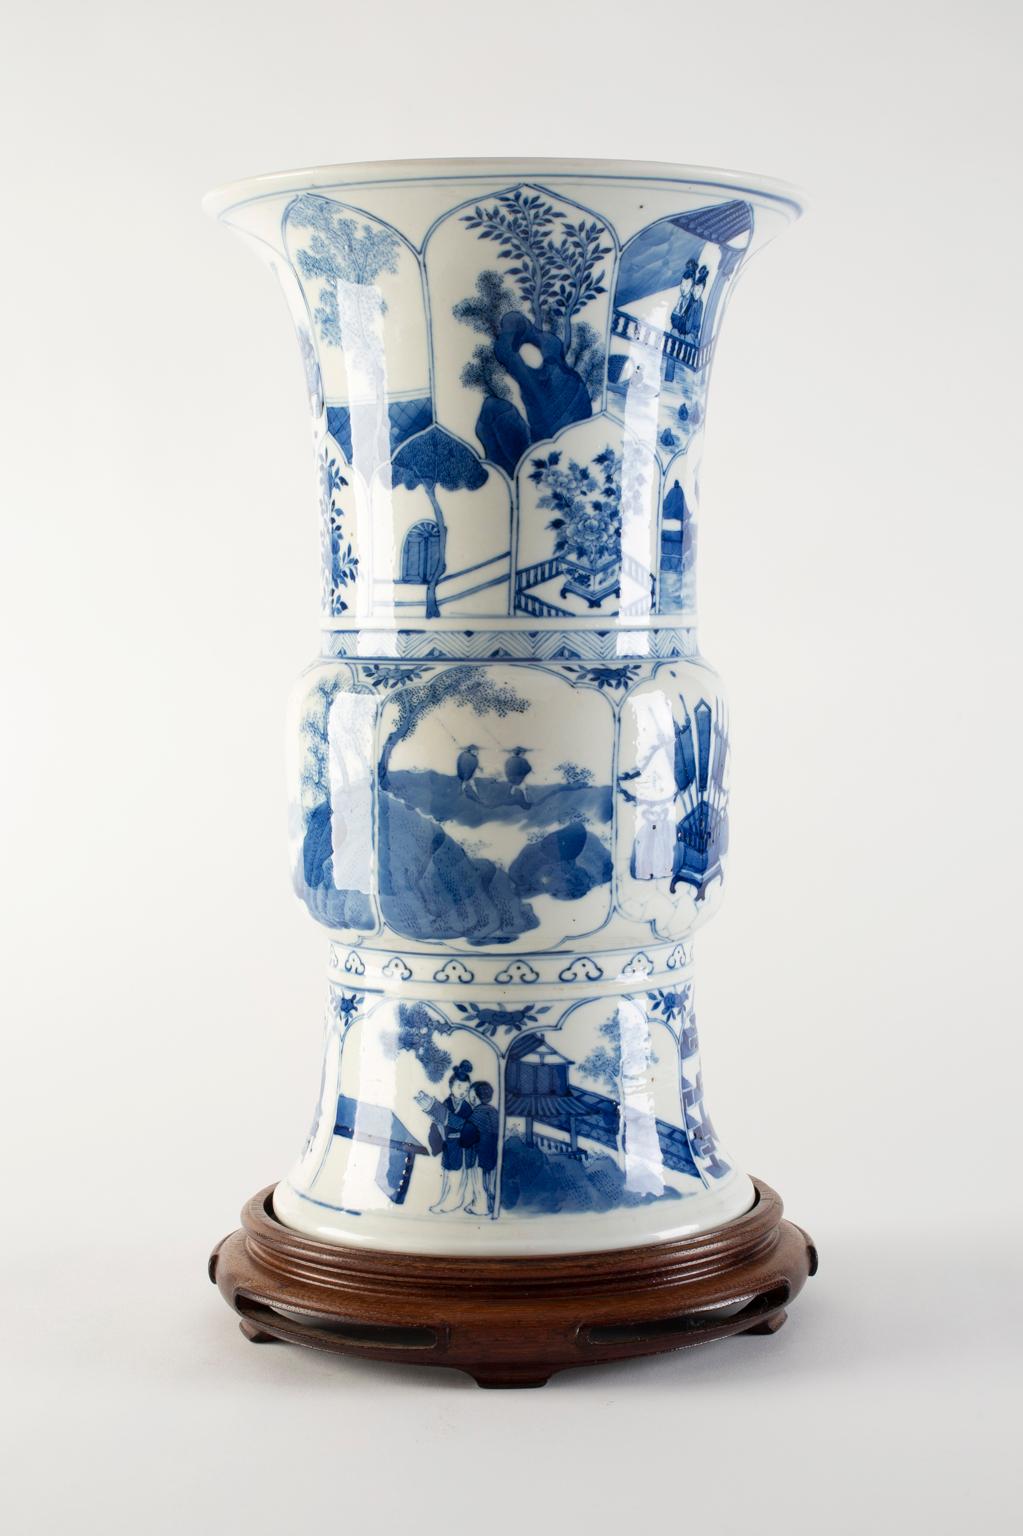 Provenance: a Park Avenue collection

Exhibited: The Oriental Ceramics Society of Hong Kong, Blue and White Exhibition No. 105 (label on underside)

Chinese Kangxi Period blue and white glazed porcelain Gu vase decorated over all with figures in